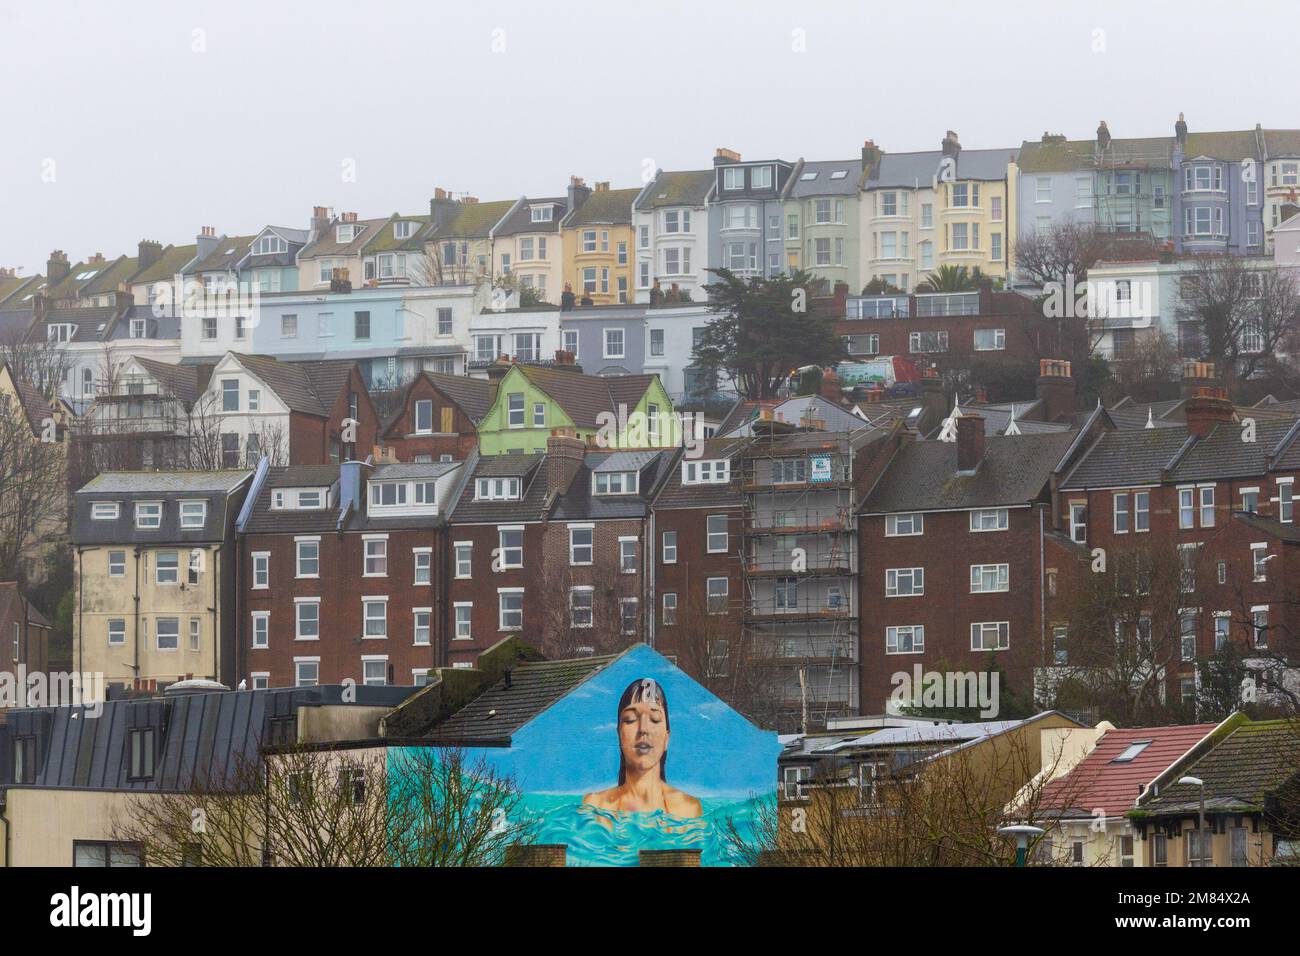 Hastings, East Sussex, UK. 12th Jan, 2023. UK Weather: Heavy rain with high winds in the coastal town of Hastings in East Sussex. High temperatures of 7°C. Dreary day on the clifftop terraces. Photo Credit: Paul Lawrenson/Alamy Live News Stock Photo